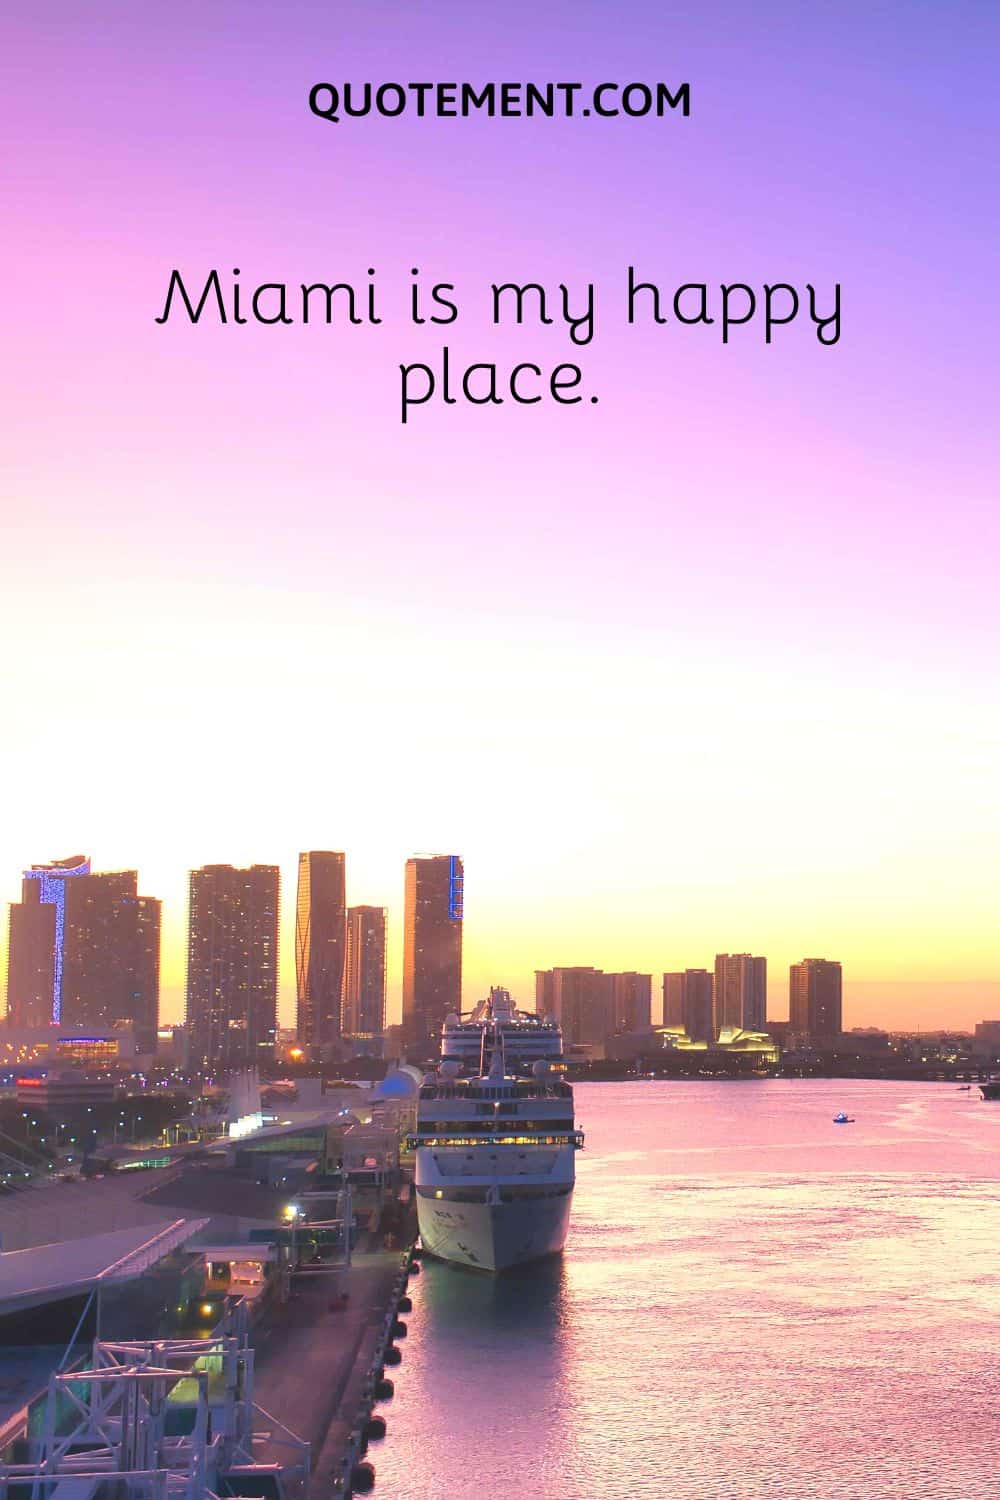 Miami is my happy place